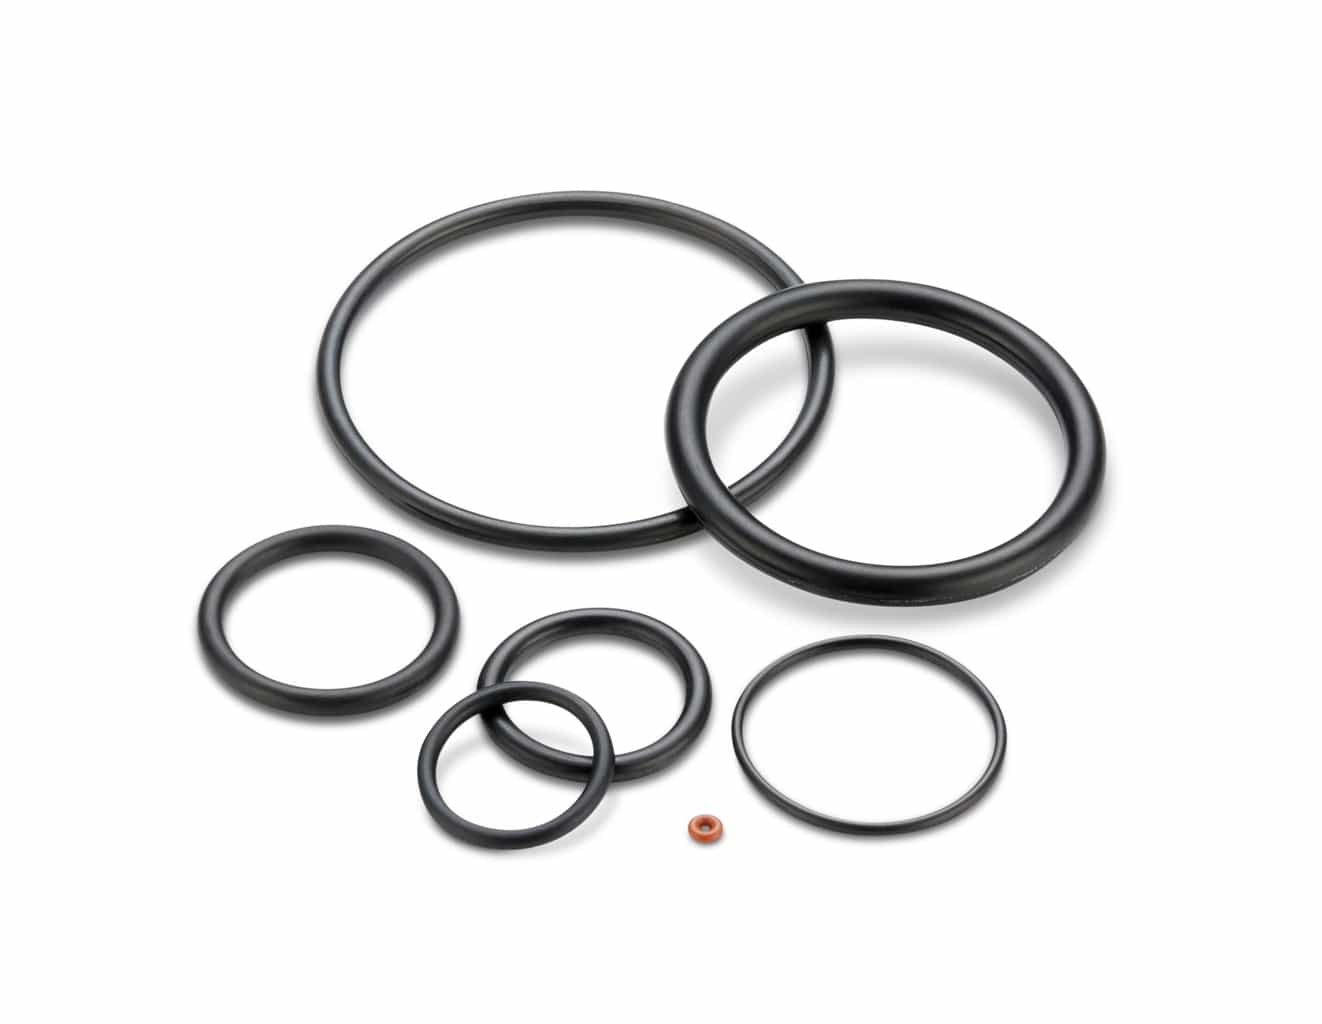 2mm Section 3.5mm Bore NITRILE 70 Rubber O-Rings 